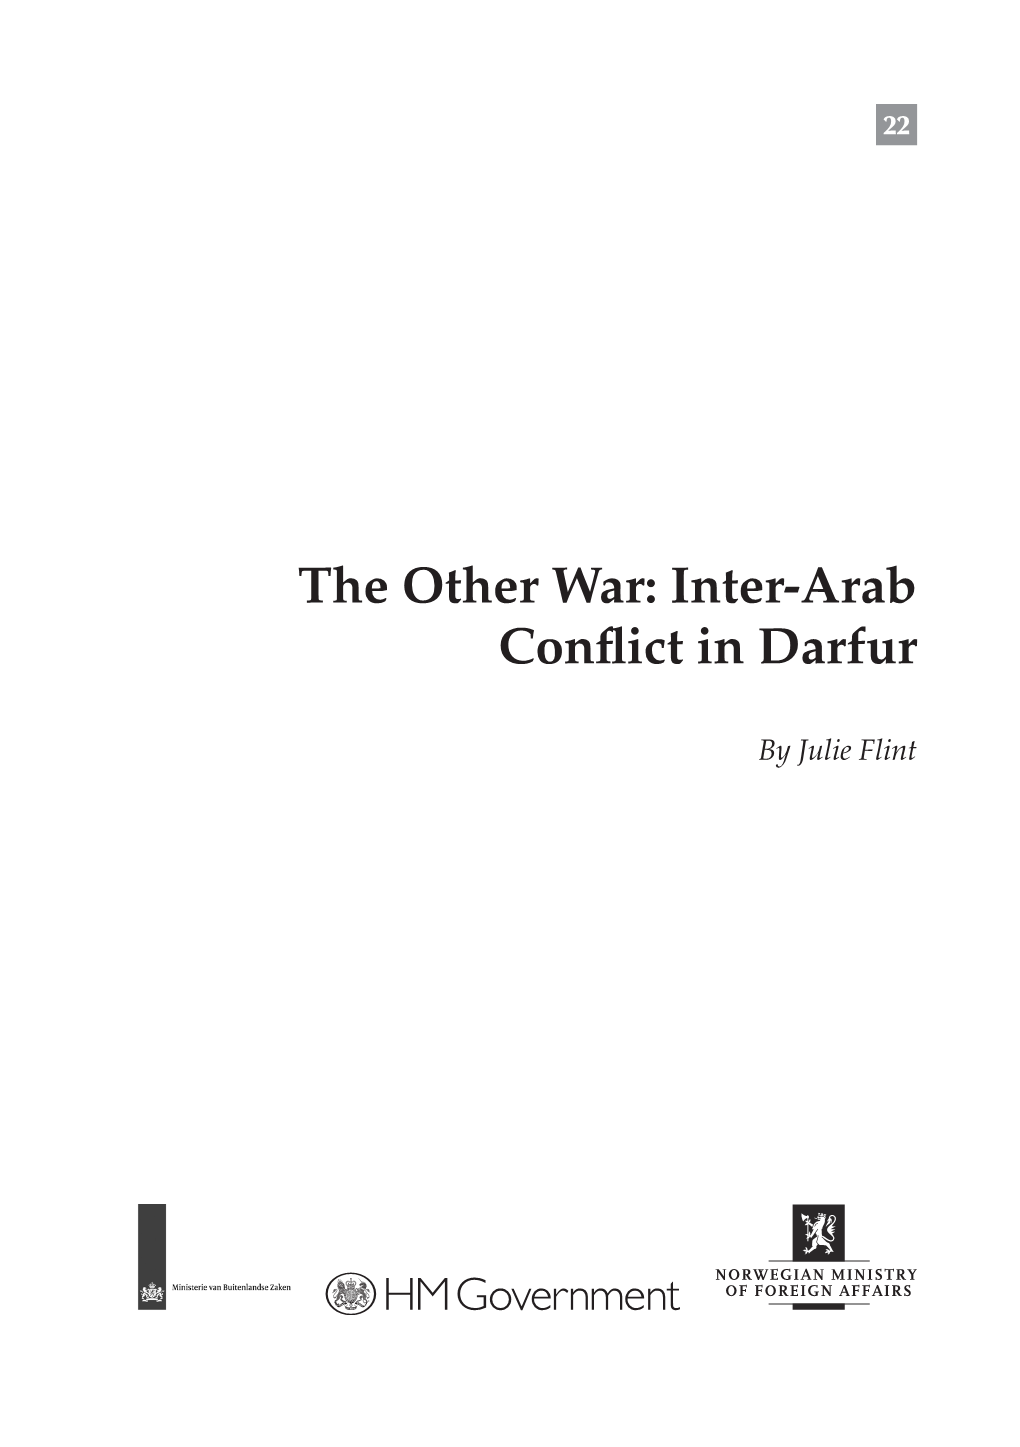 The Other War: Inter-Arab Conflict in Darfur